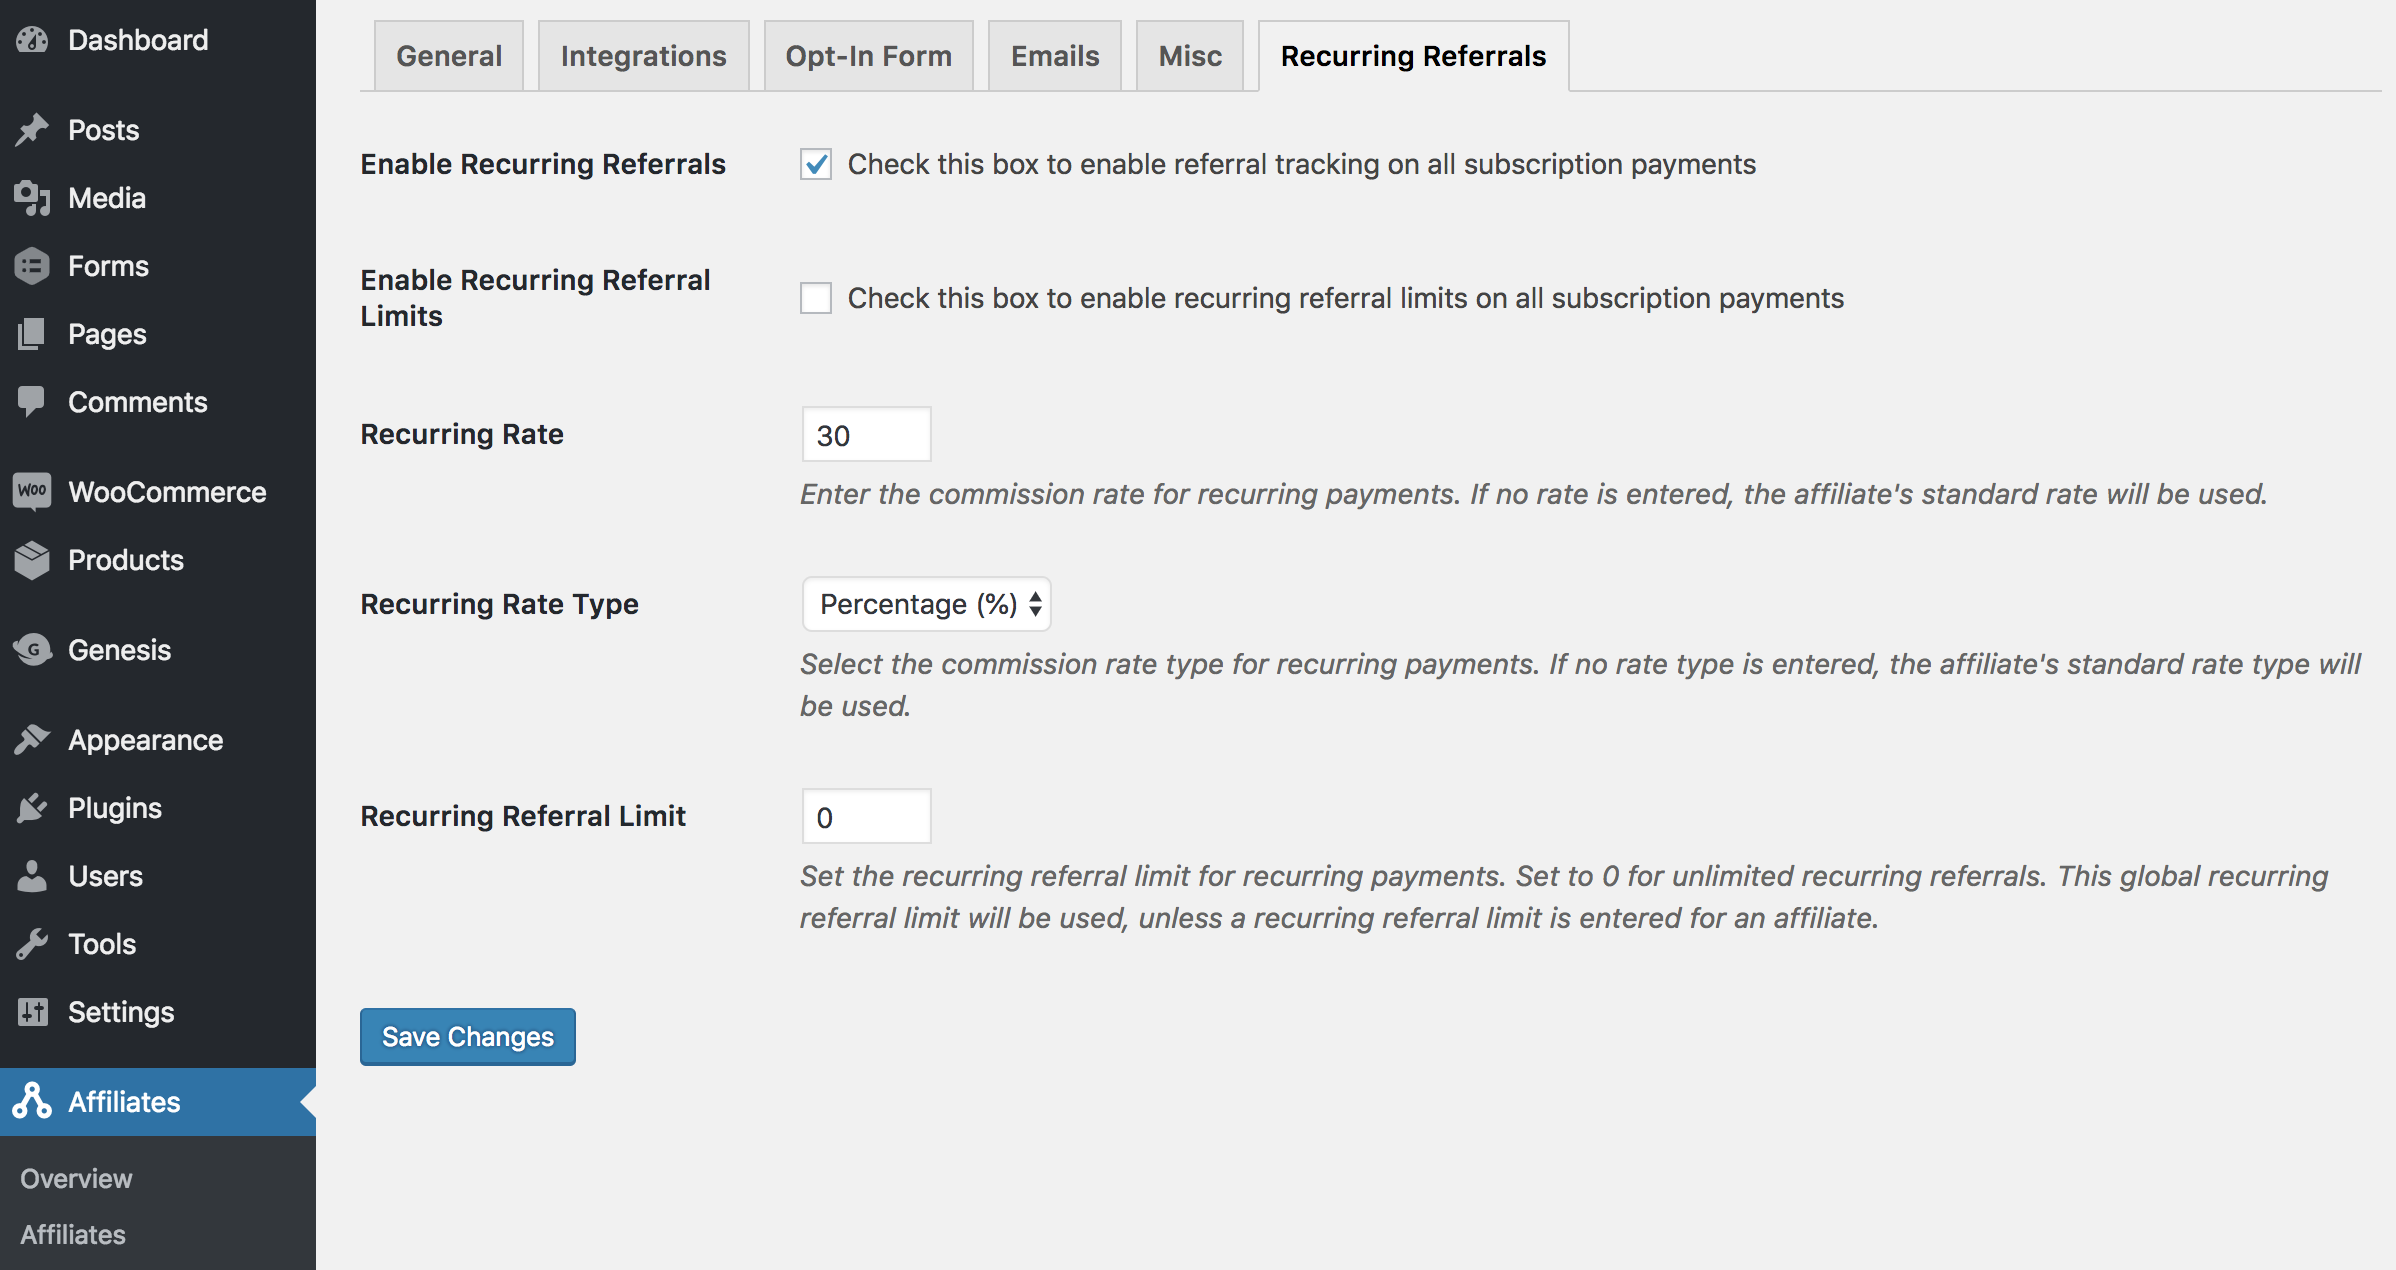 Settings for Recurring Referrals